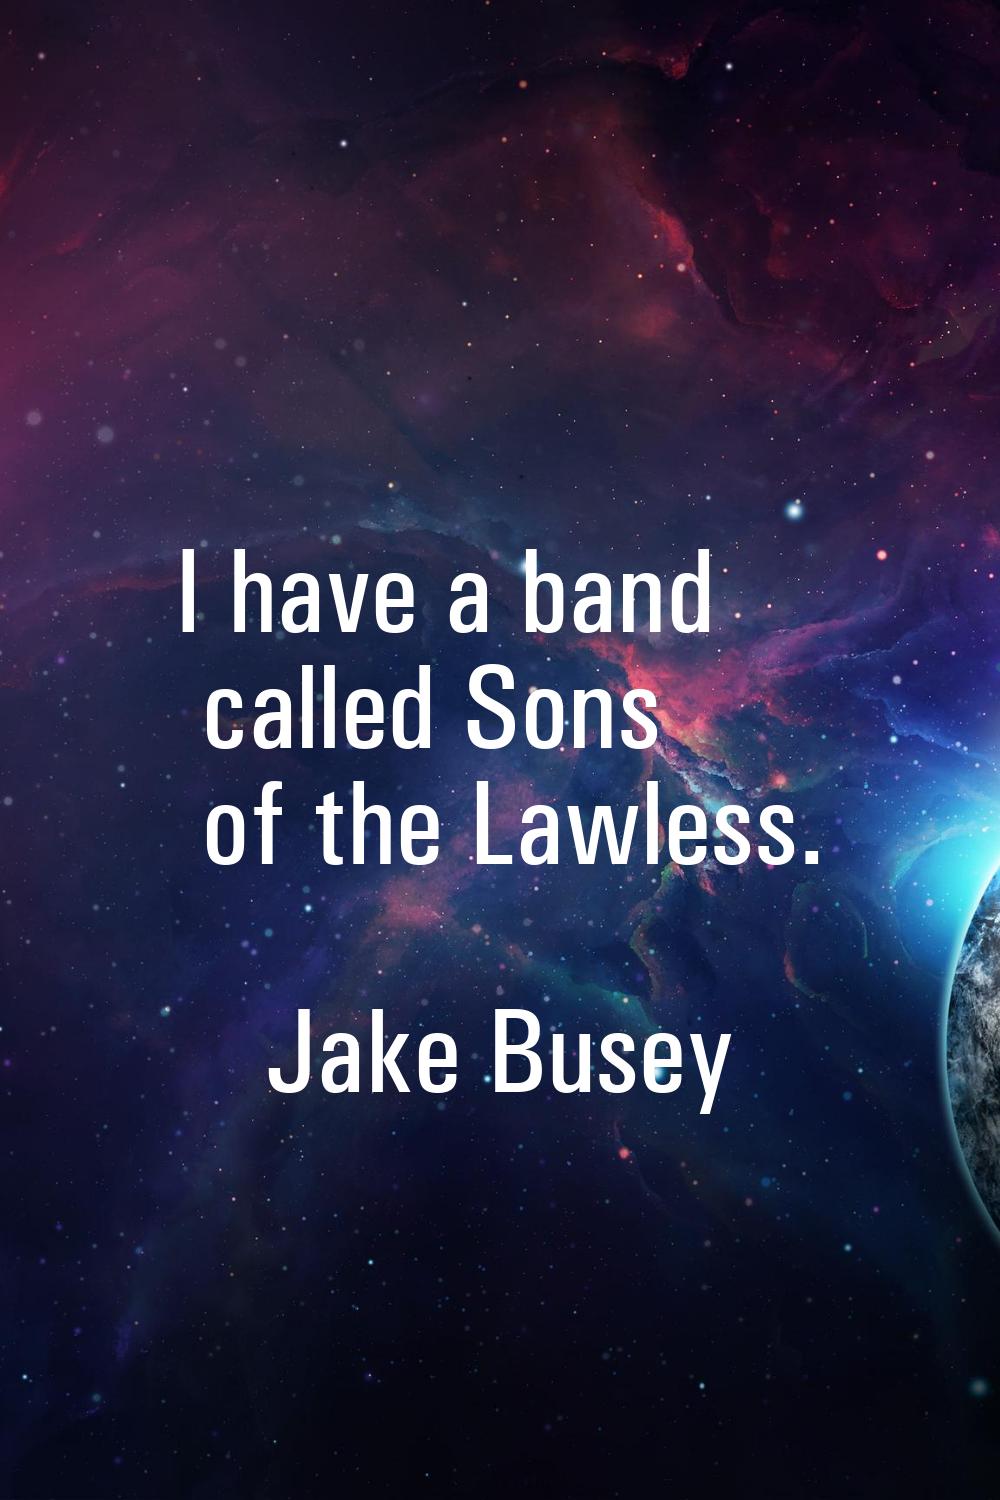 I have a band called Sons of the Lawless.